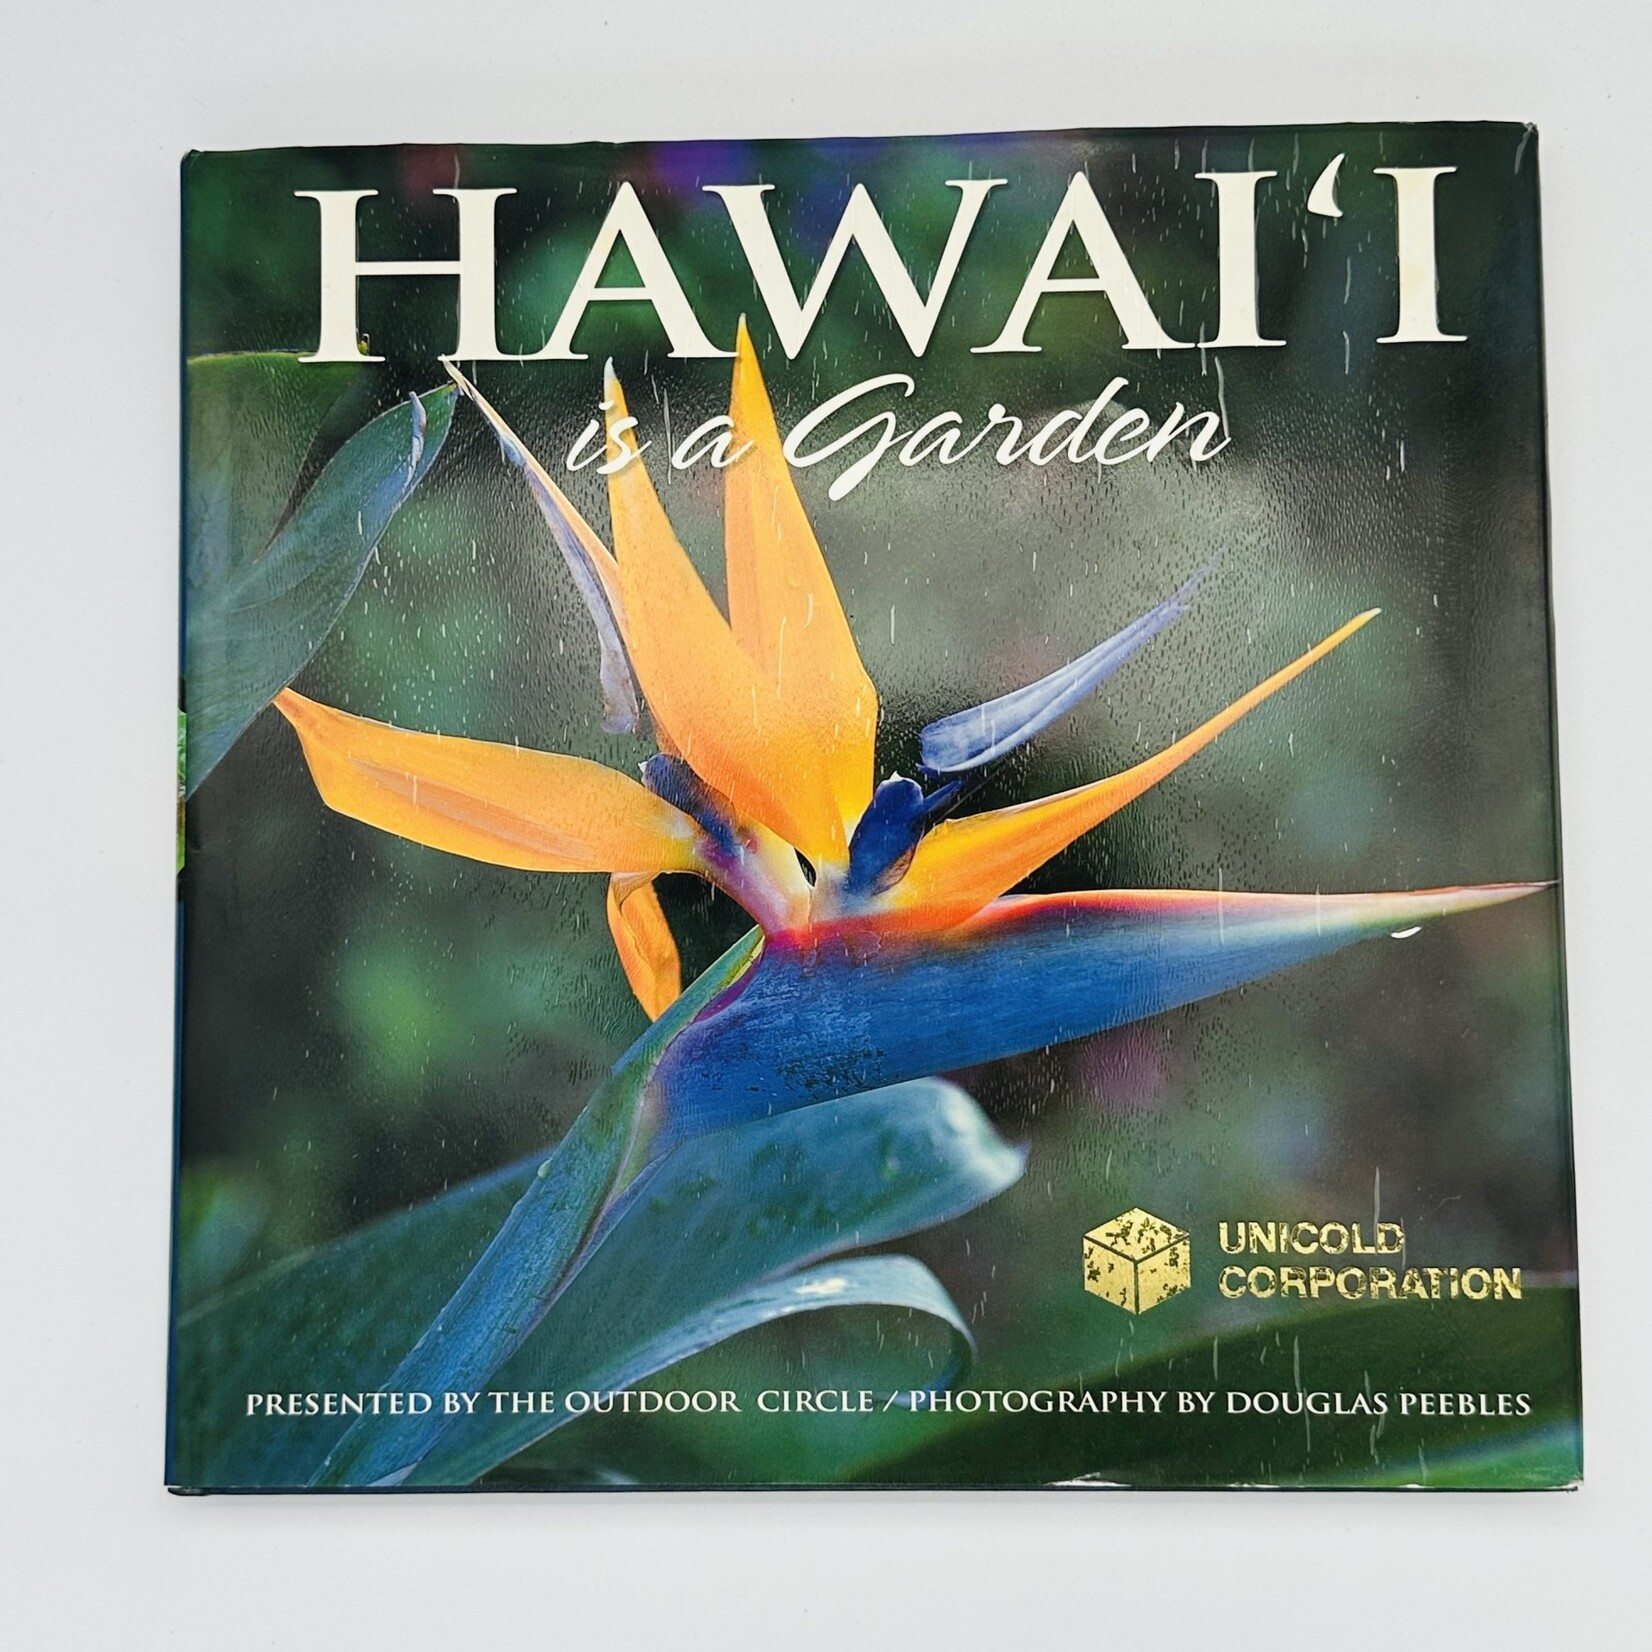 Mission Zero ReLoved - Hawai’i is a Garden